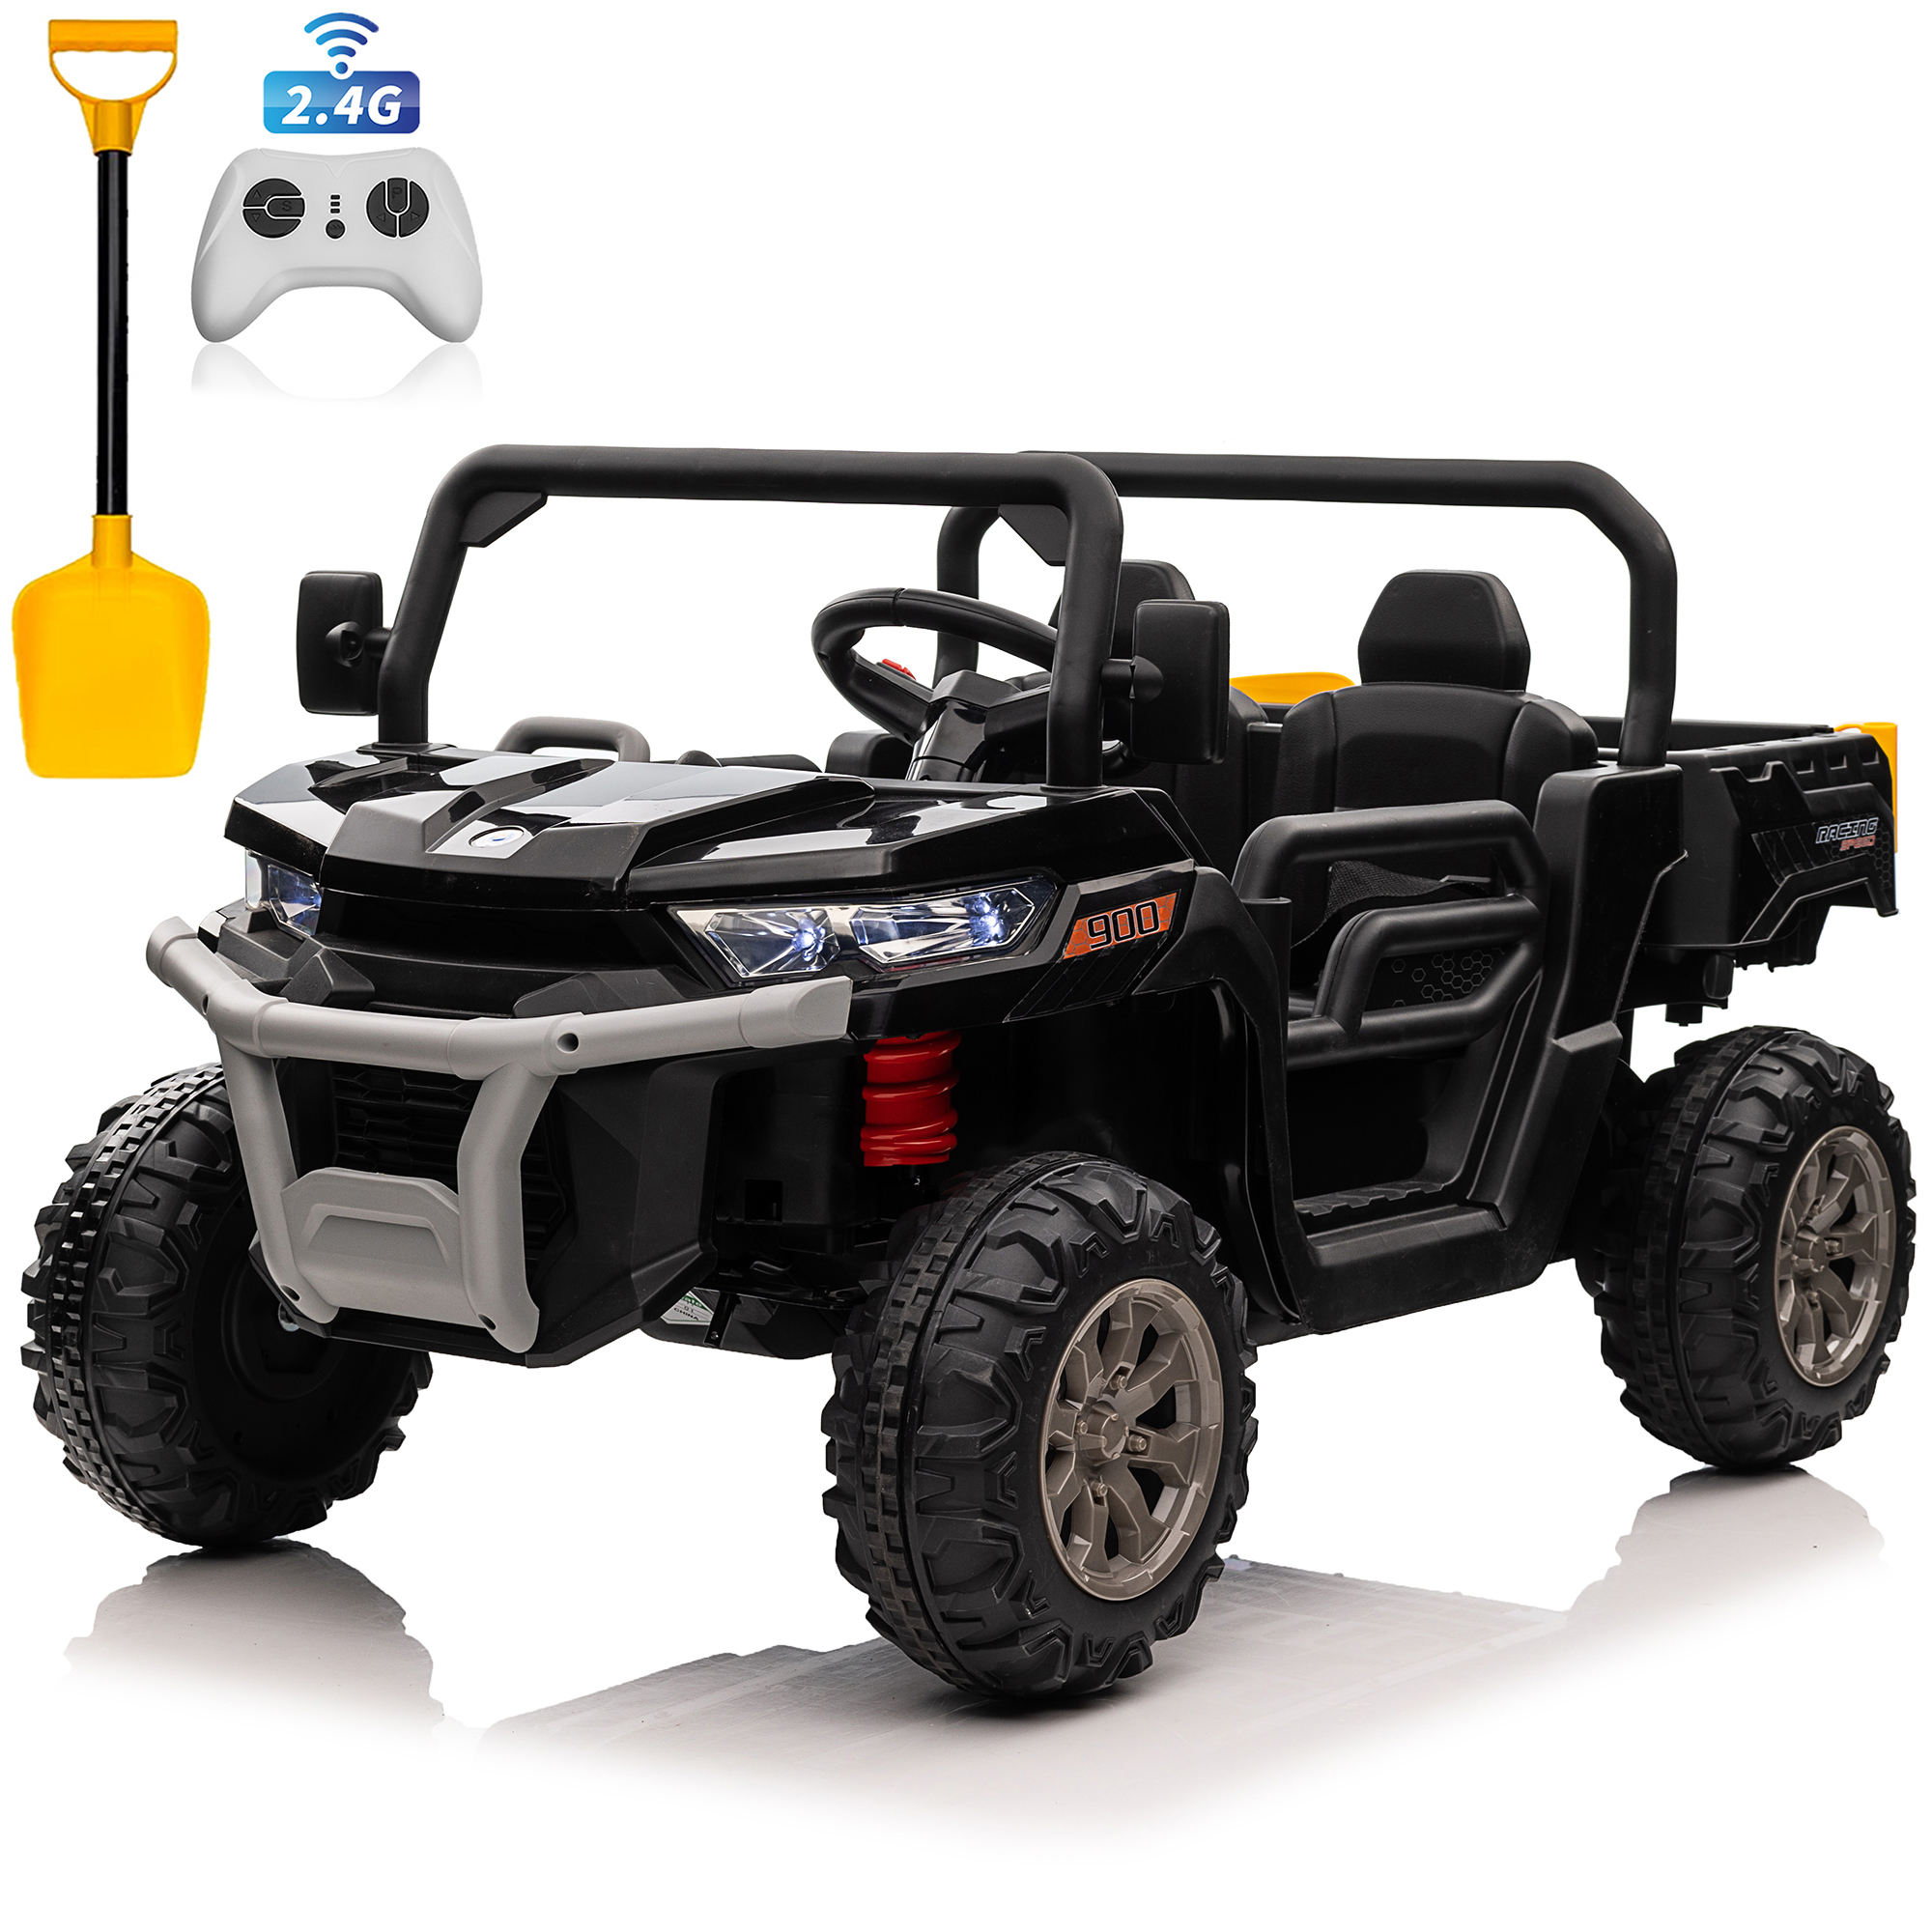 Joyracer 24V Kids Ride on UTV with Remote Control, 2 Seater 2x200W Ride on Dump Truck Car, Electric Battery Powered Ride on Toys with Trailer & Shovel, Horn, MP3, Bluetooth Music, Big Kids, Black - image 1 of 15